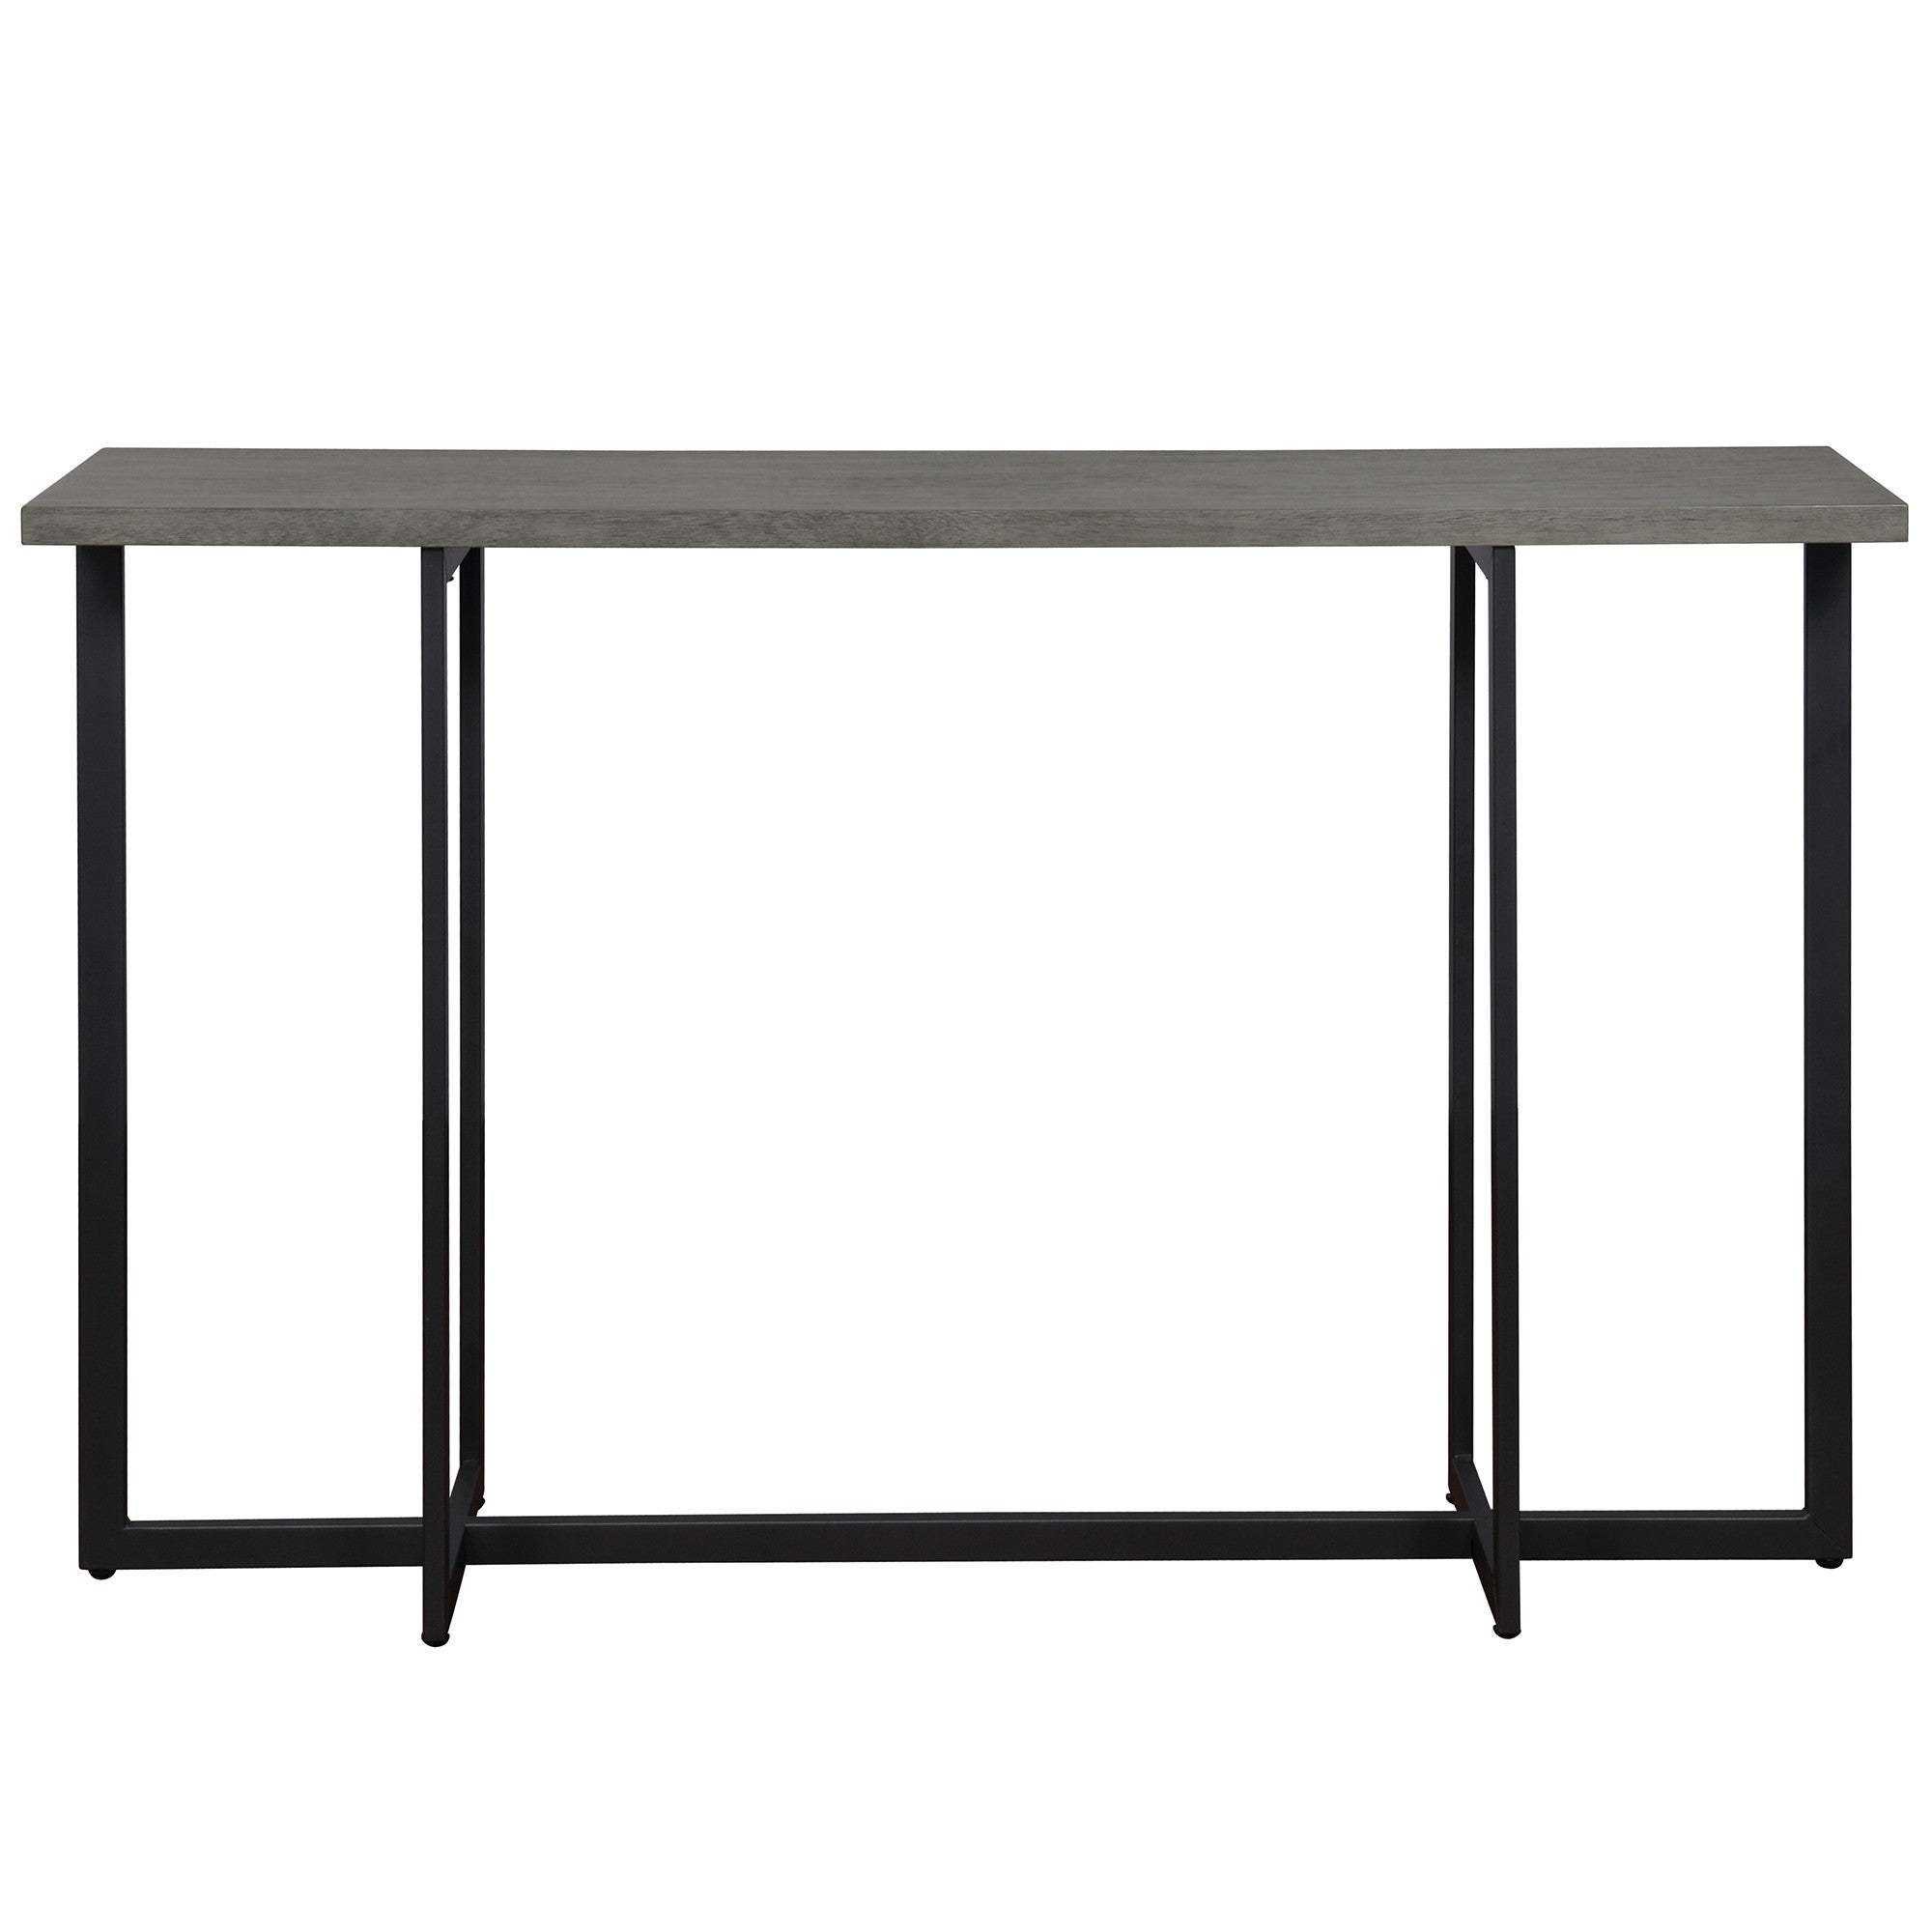 Farley Console Table